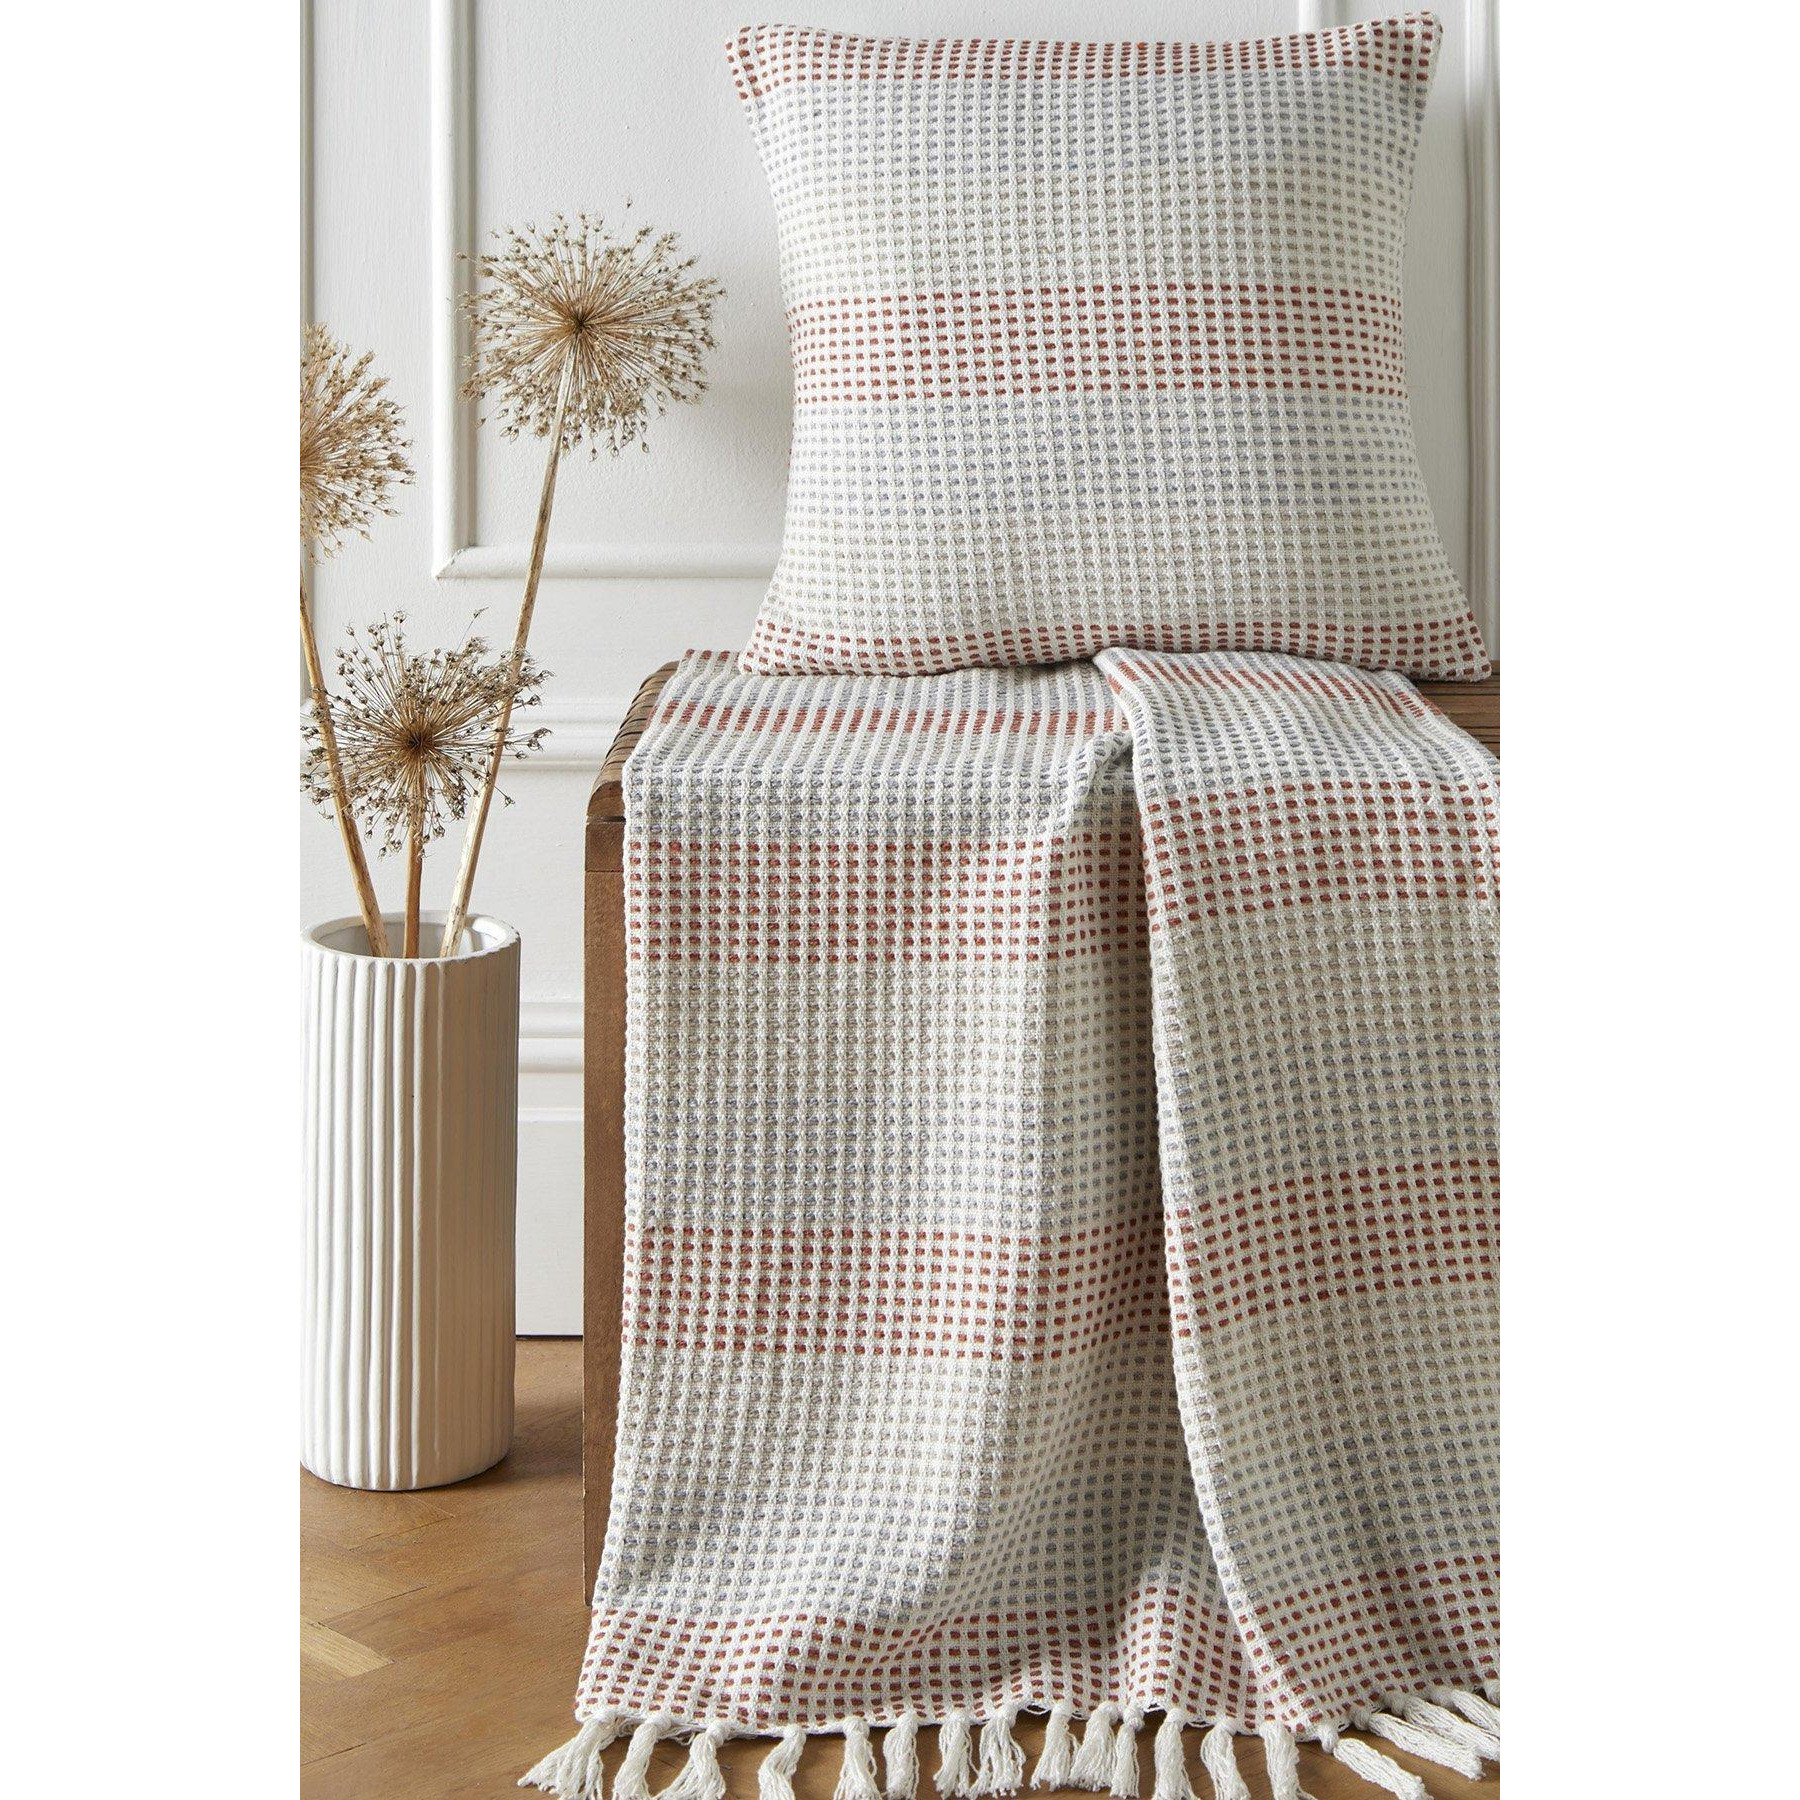 'Reva' 100% Cotton Bedspread Throw Woven Stripes With Tasselled Edges - image 1